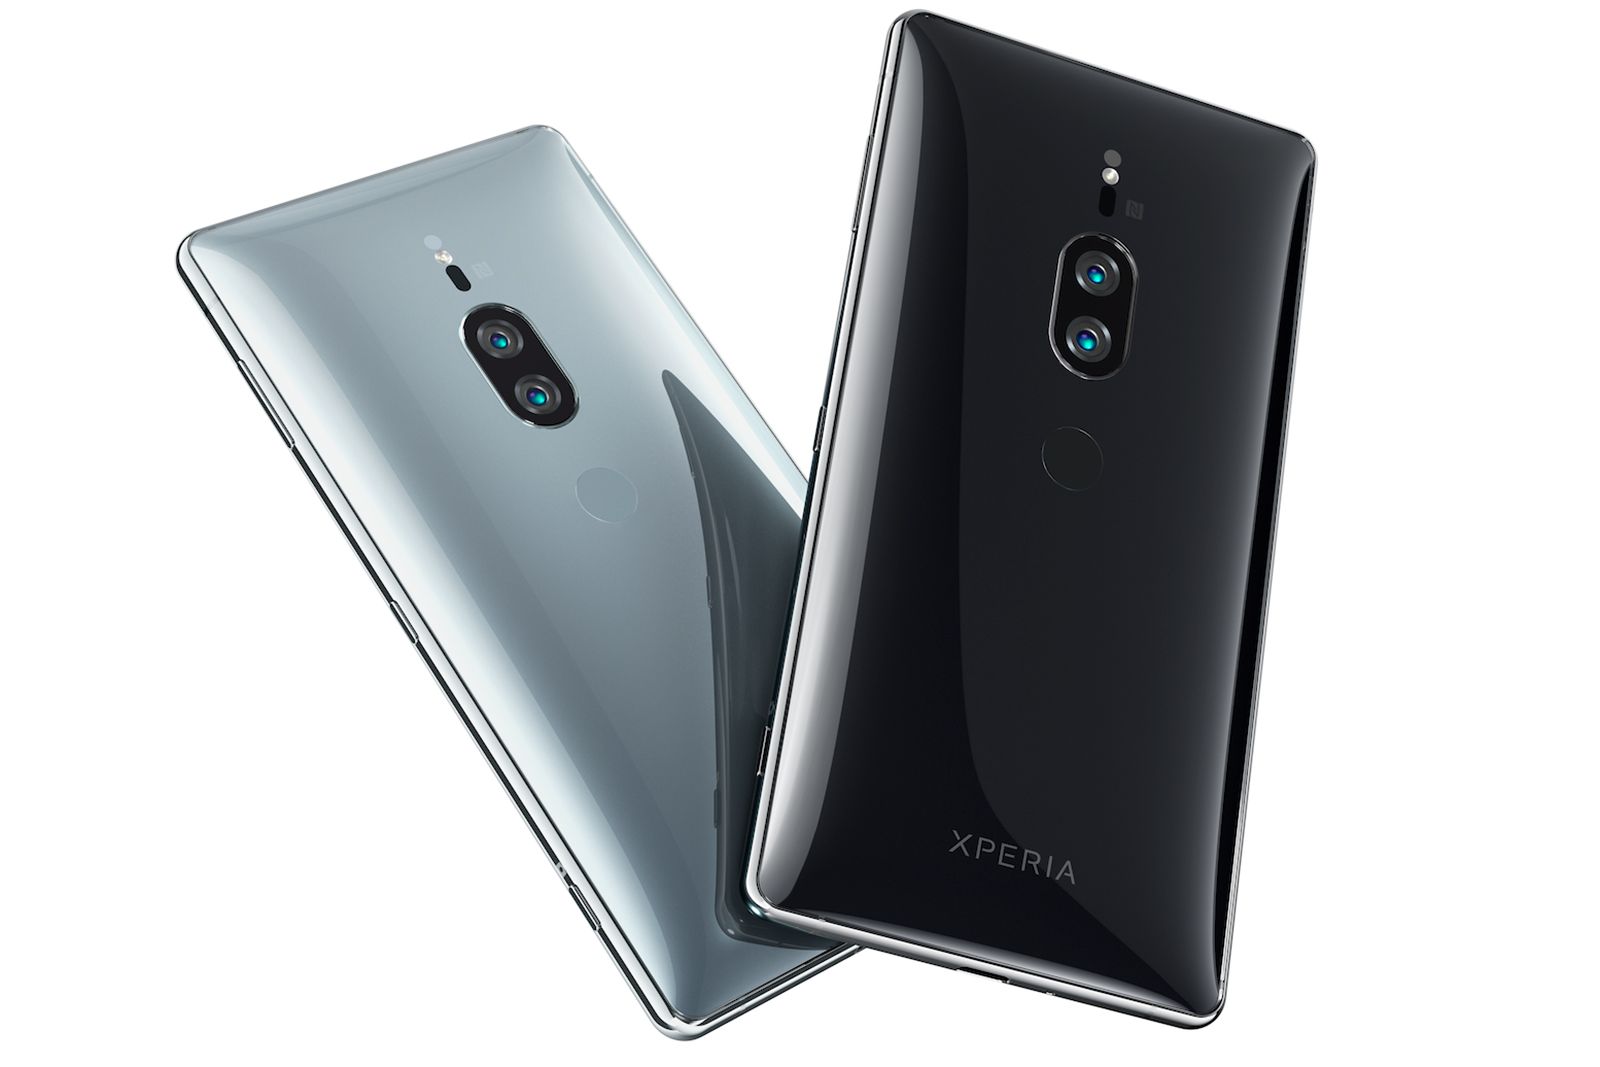 Sony announced Xperia XZ2 Premium with dual-lens camera and 4K HDR display image 1